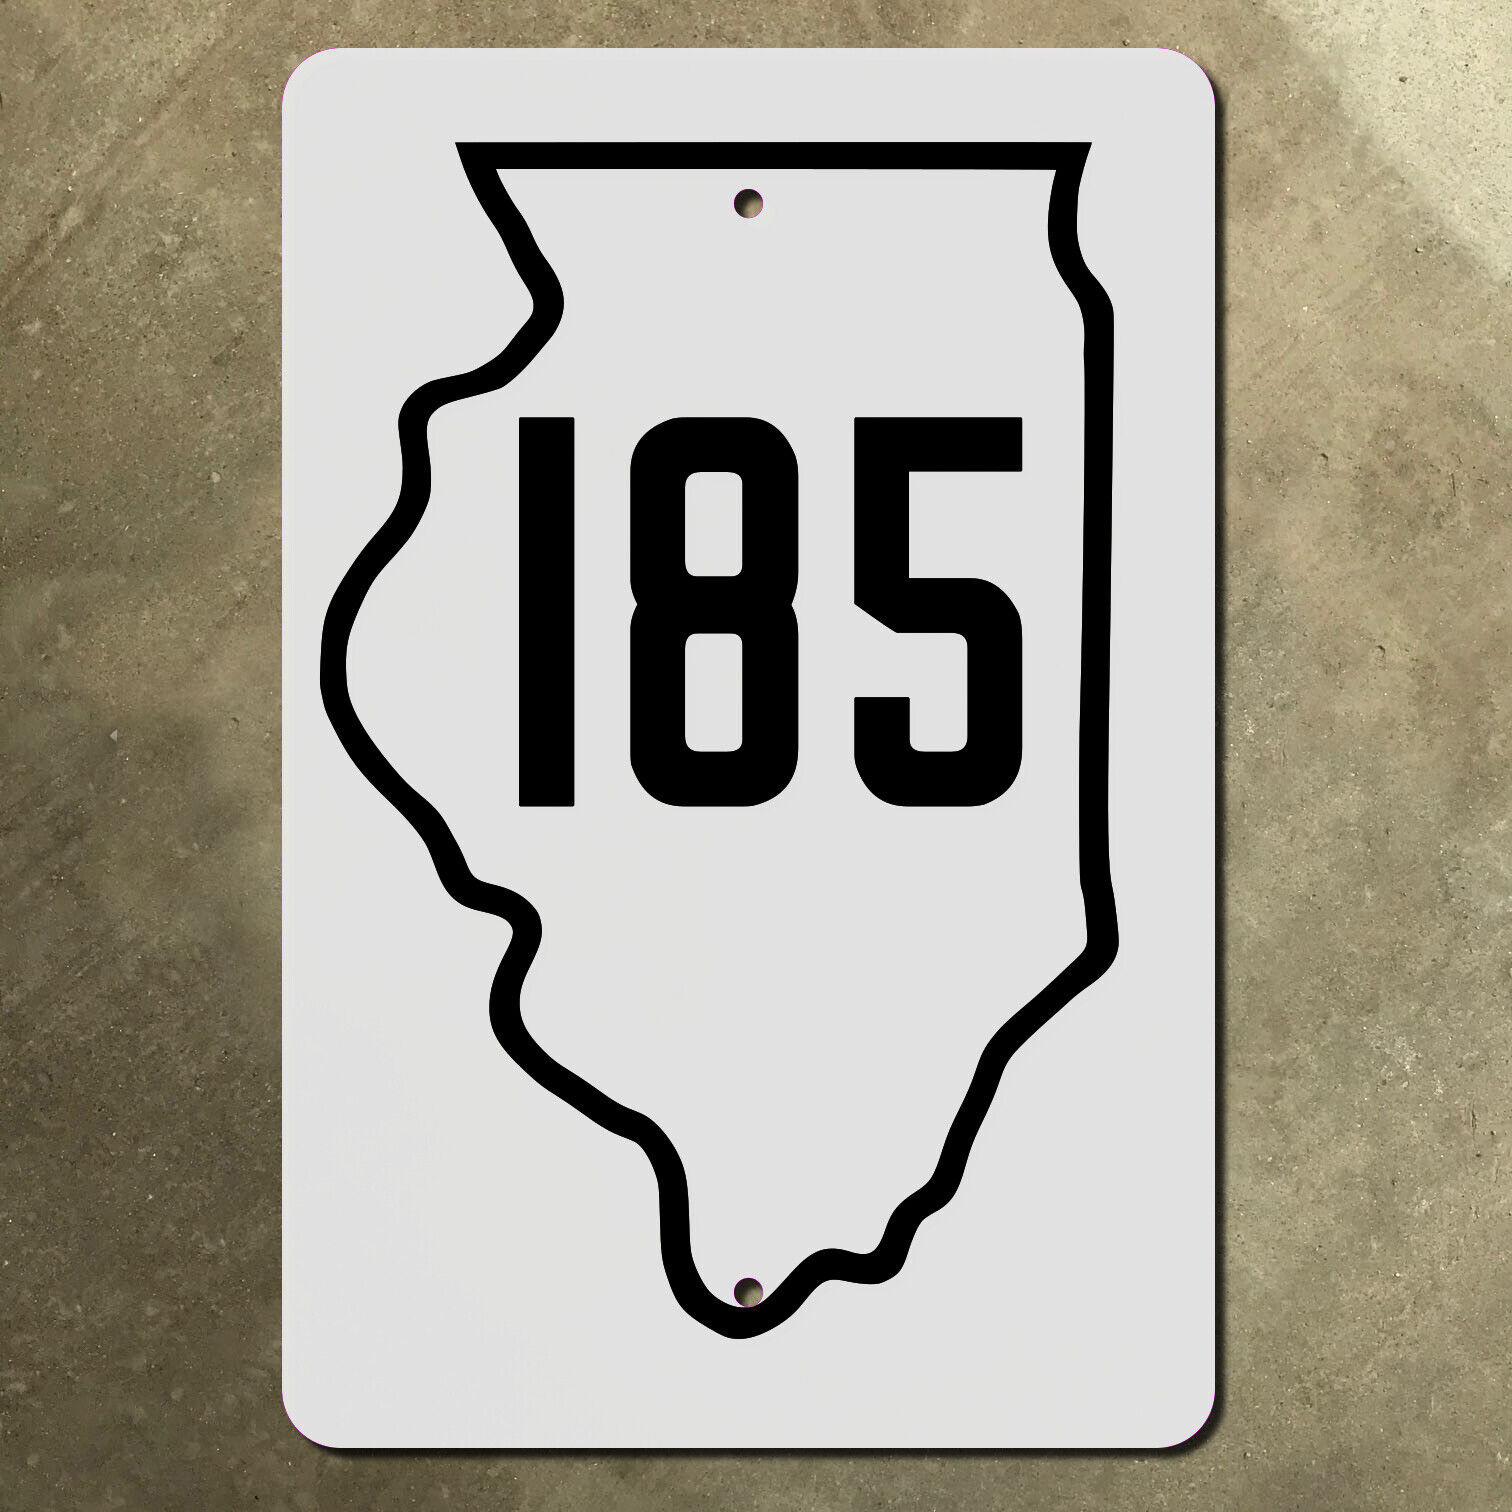 Illinois state Route 185 highway marker road sign Vandalia 1934 10x15